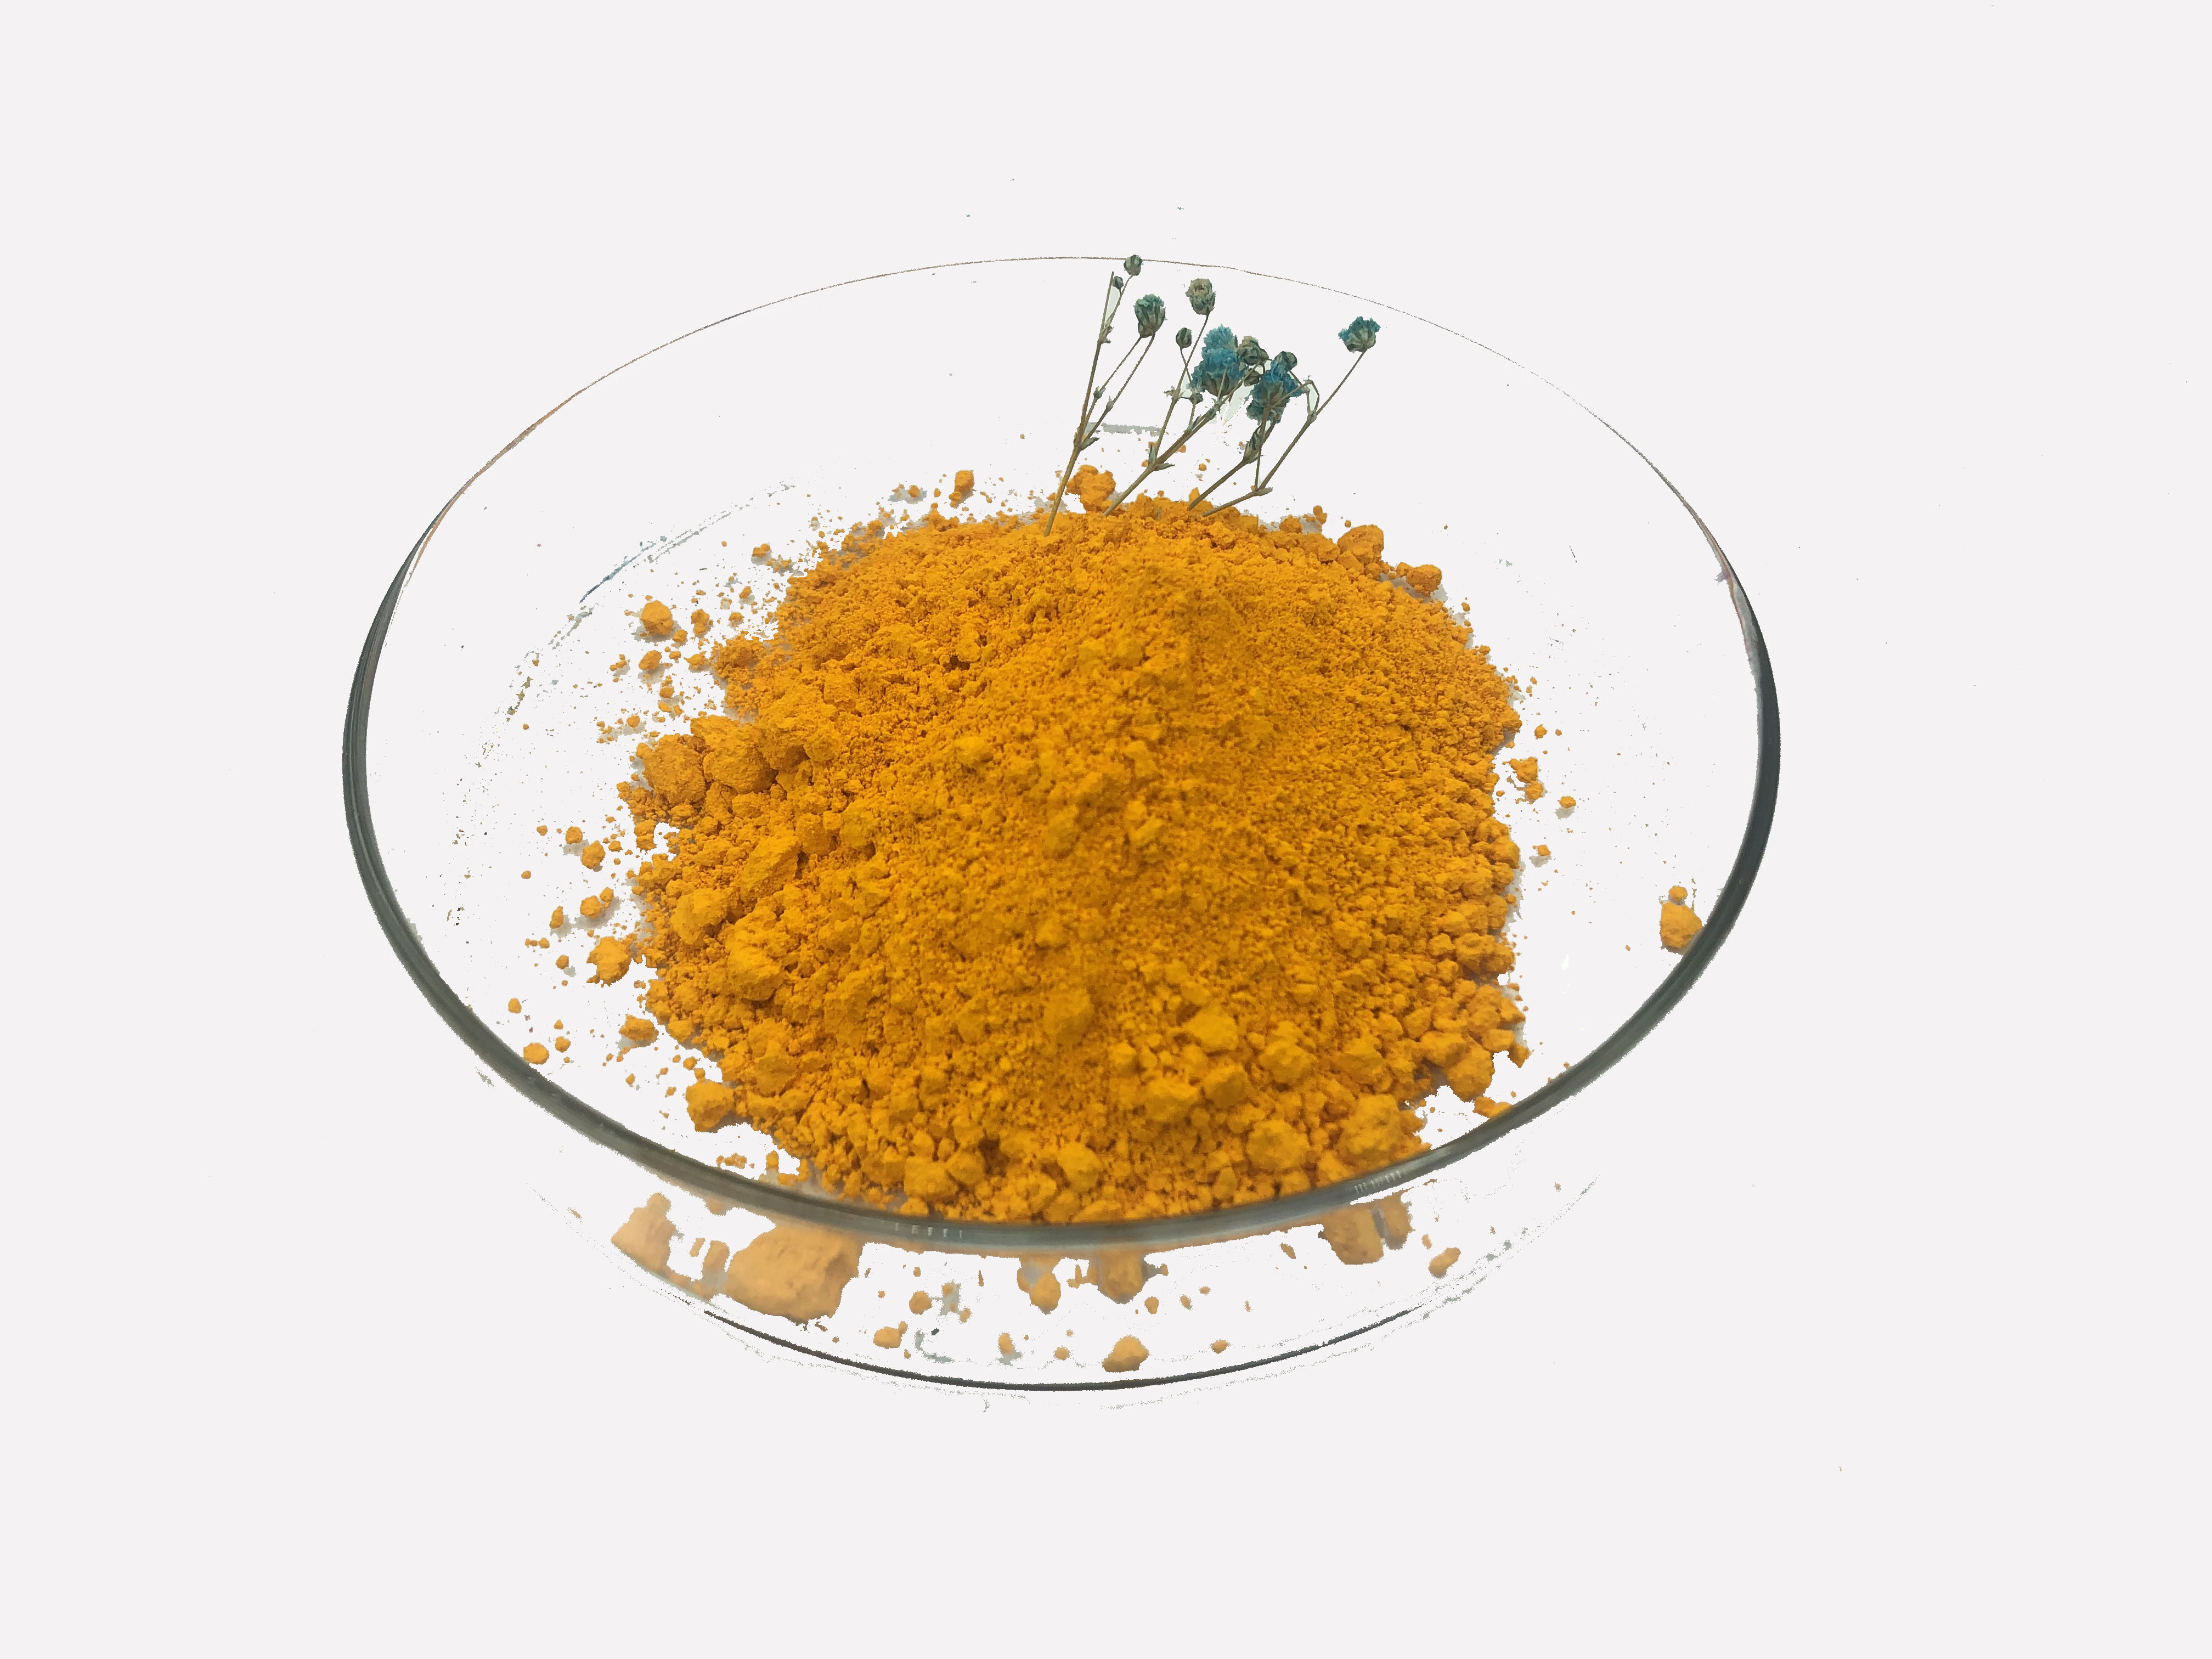 Solvent Yellow 19 High Purity Excellent Resistance Excellent Resistance For Stationery Ink And Plastic Coatings